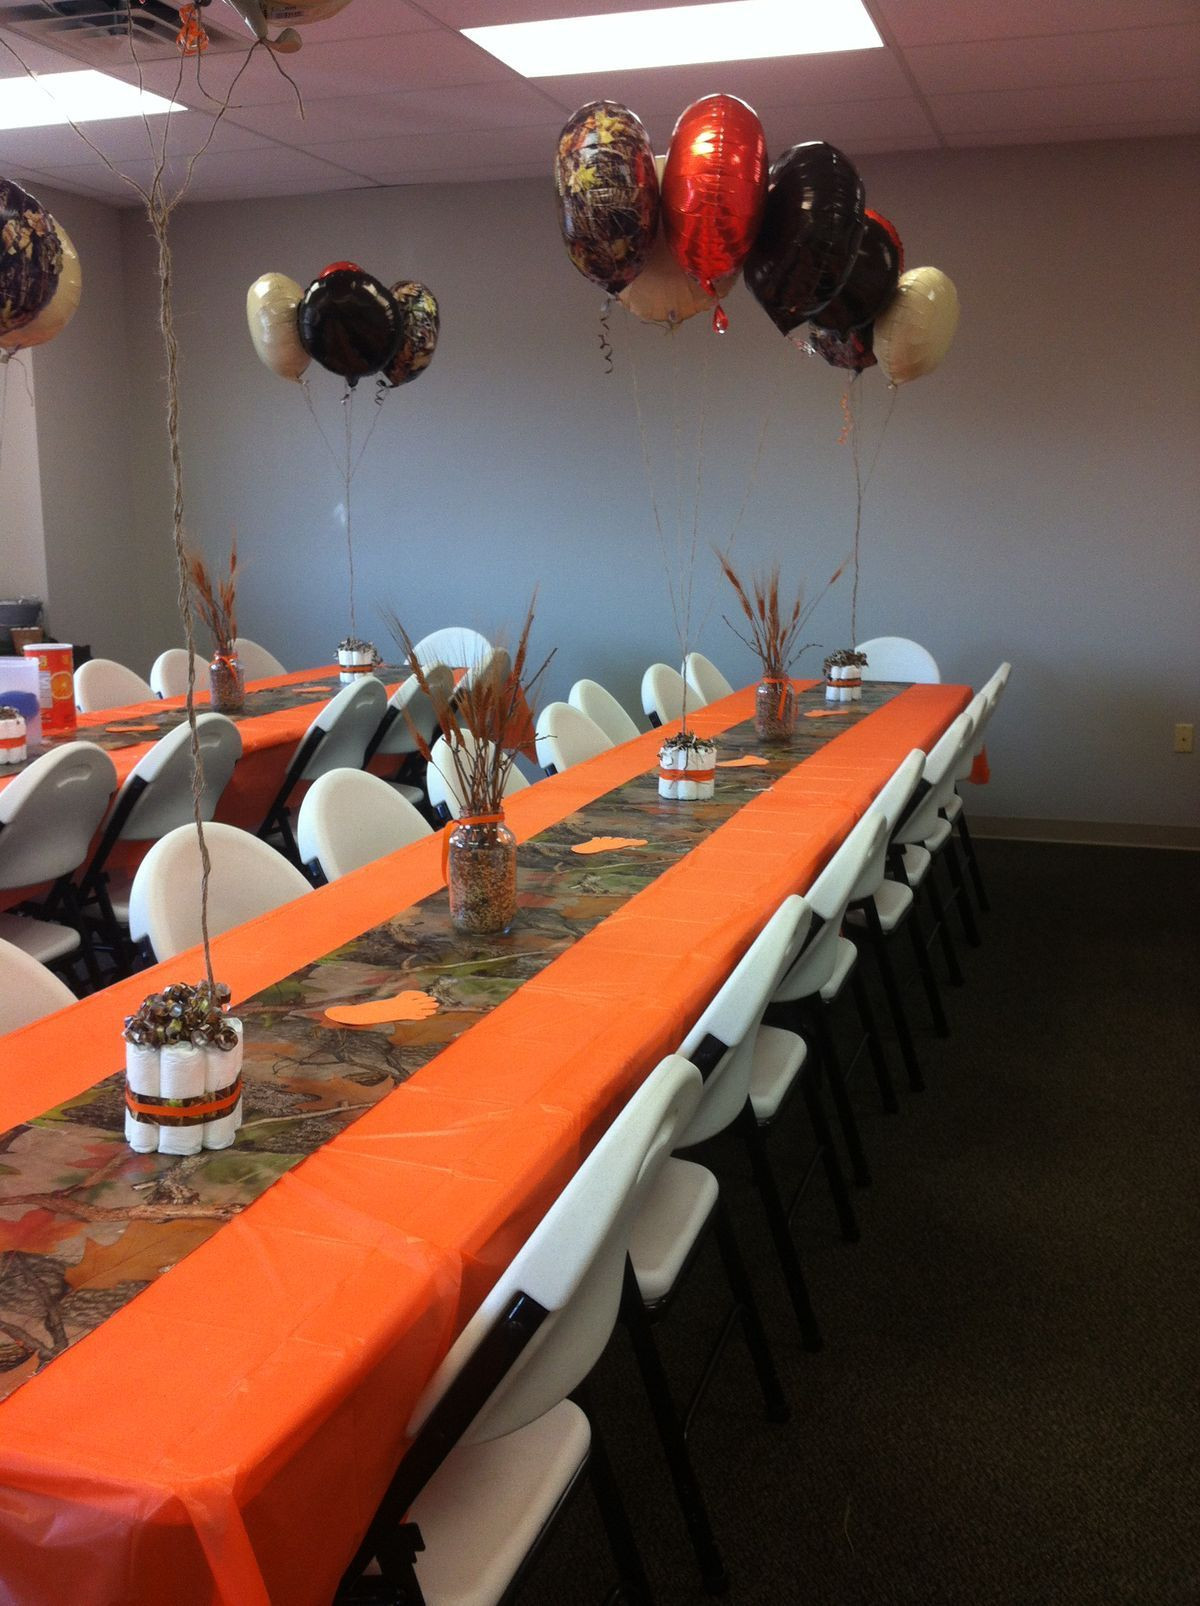 Camouflage Baby Shower Decorating Ideas
 Pin by Megan Williams on Reveal party ideas